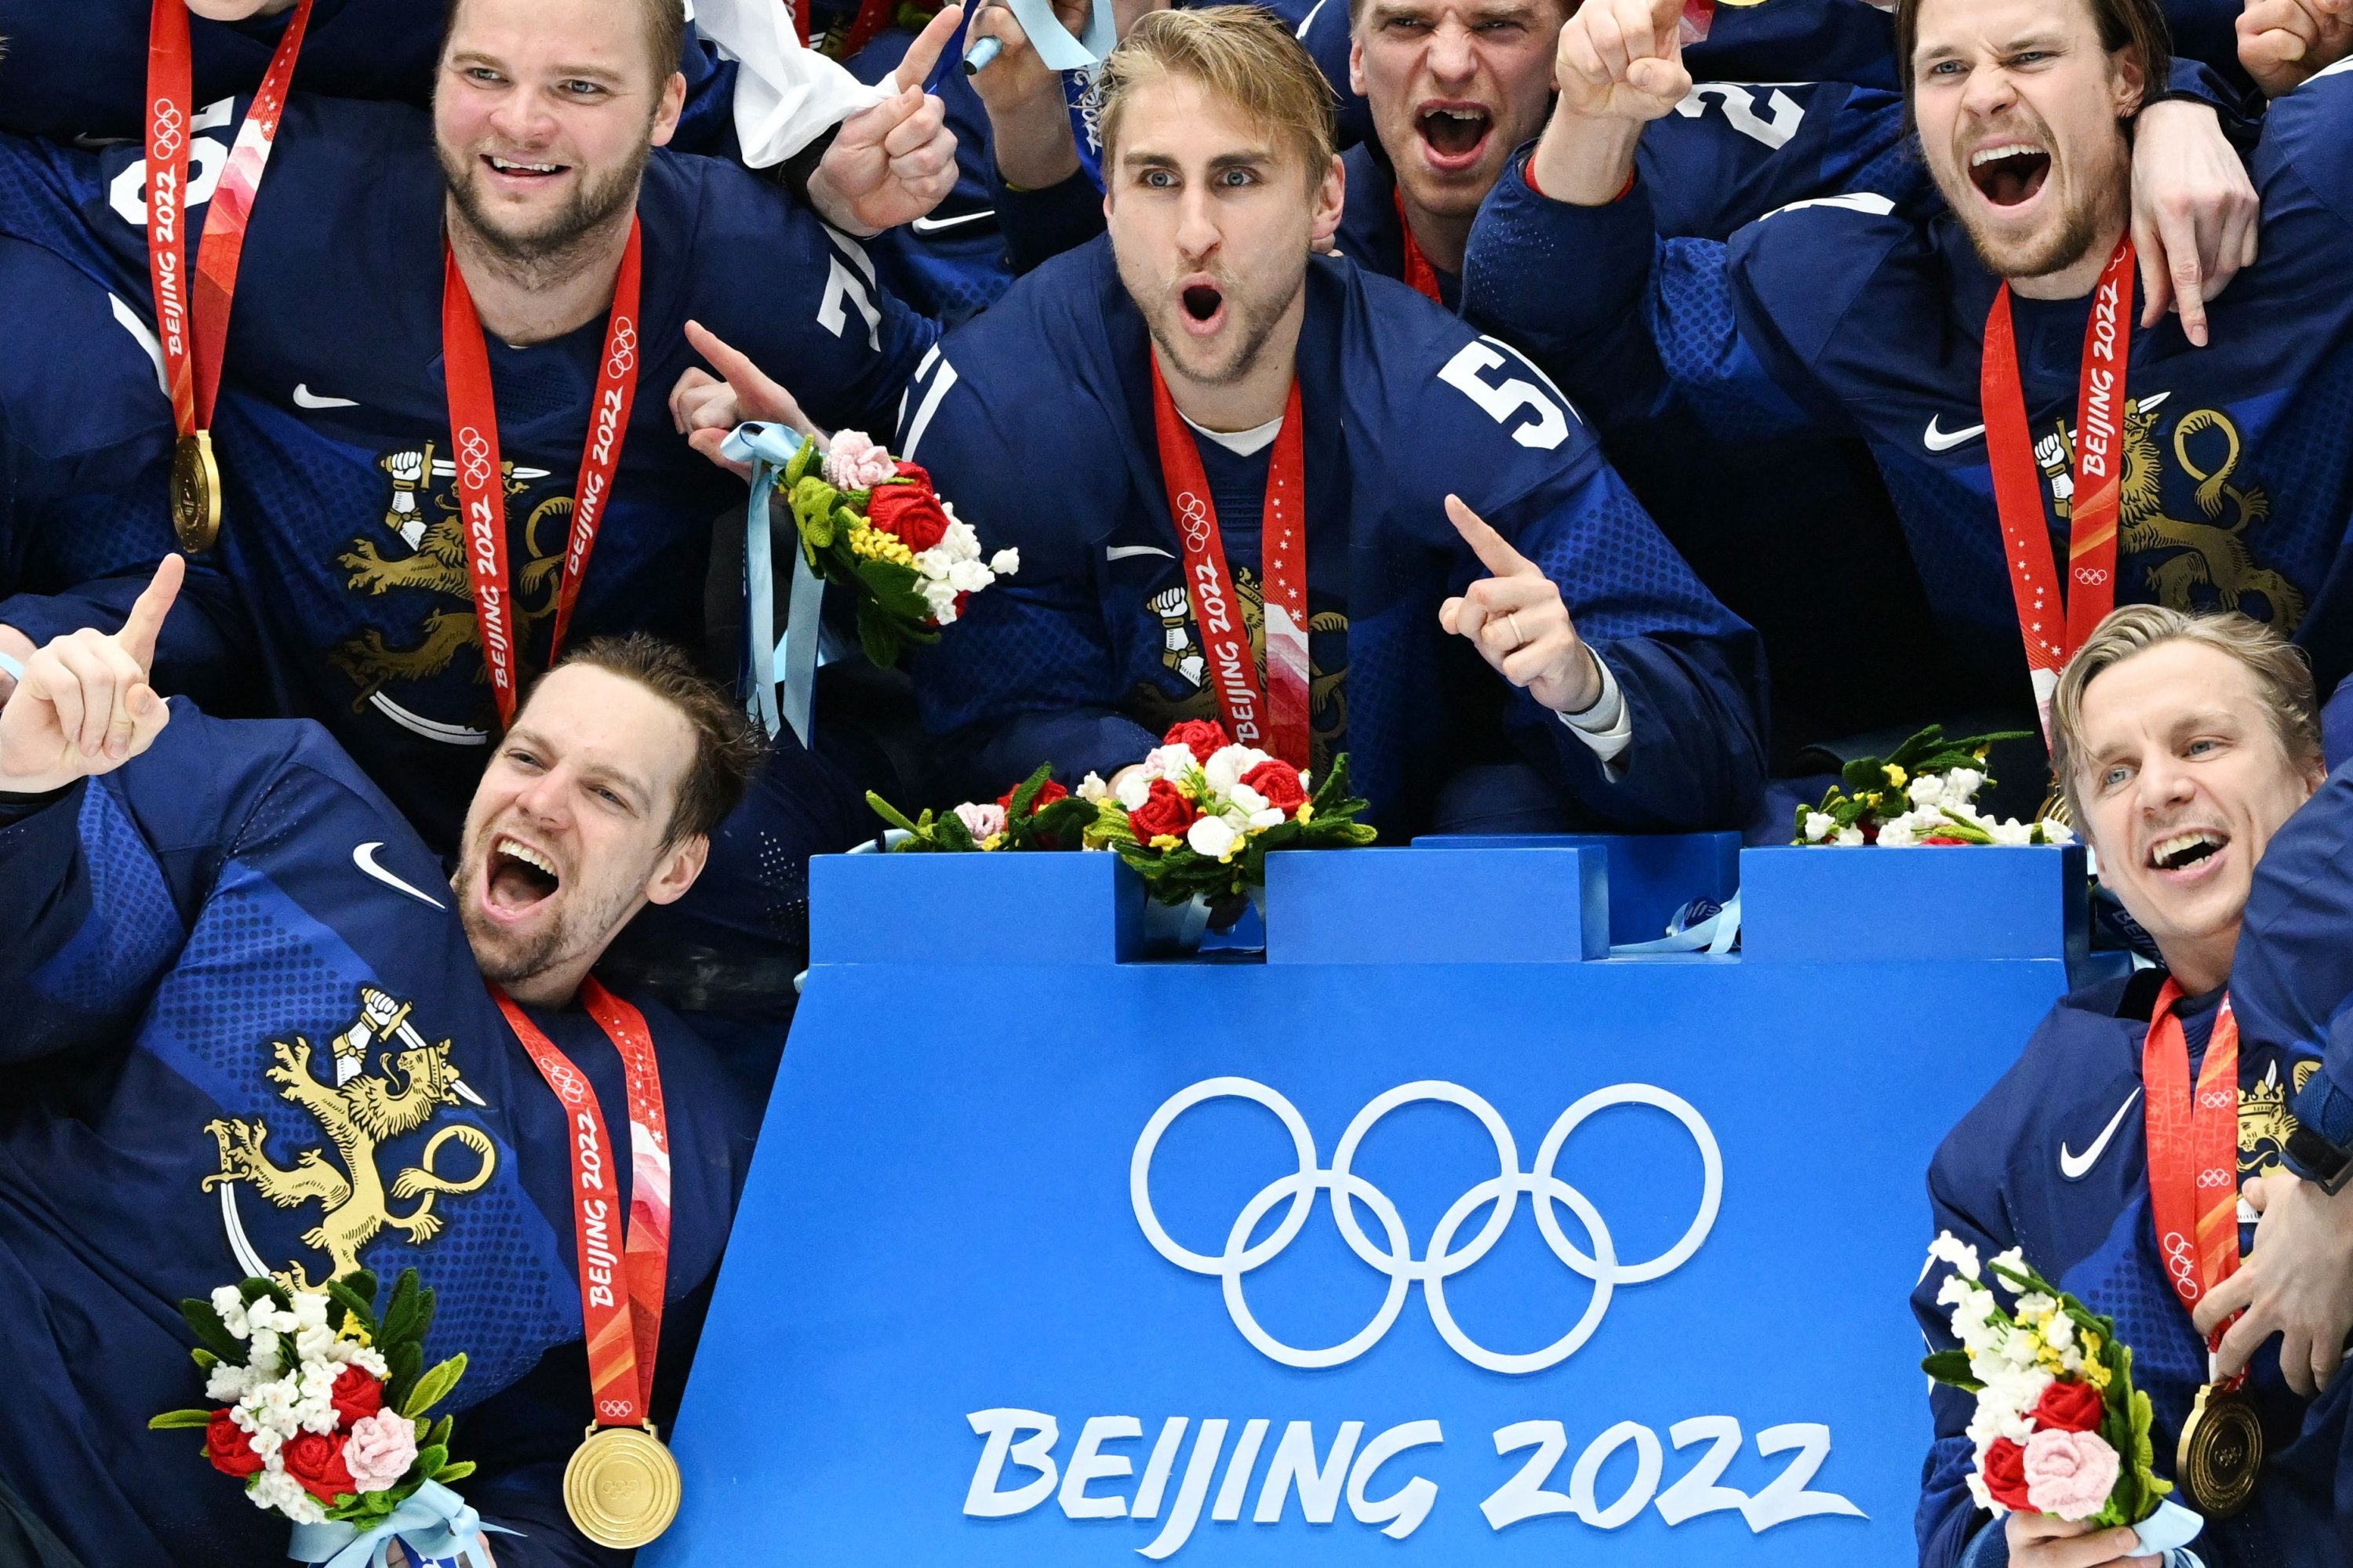 Finland players pose with their gold medals after winning the men's gold medal match of the Beijing 2022 Winter Olympic Games ice hockey competition between Finland and Russia's Olympic Committee, Beijing, China, Feb. 20, 2022. (AFP Photo)